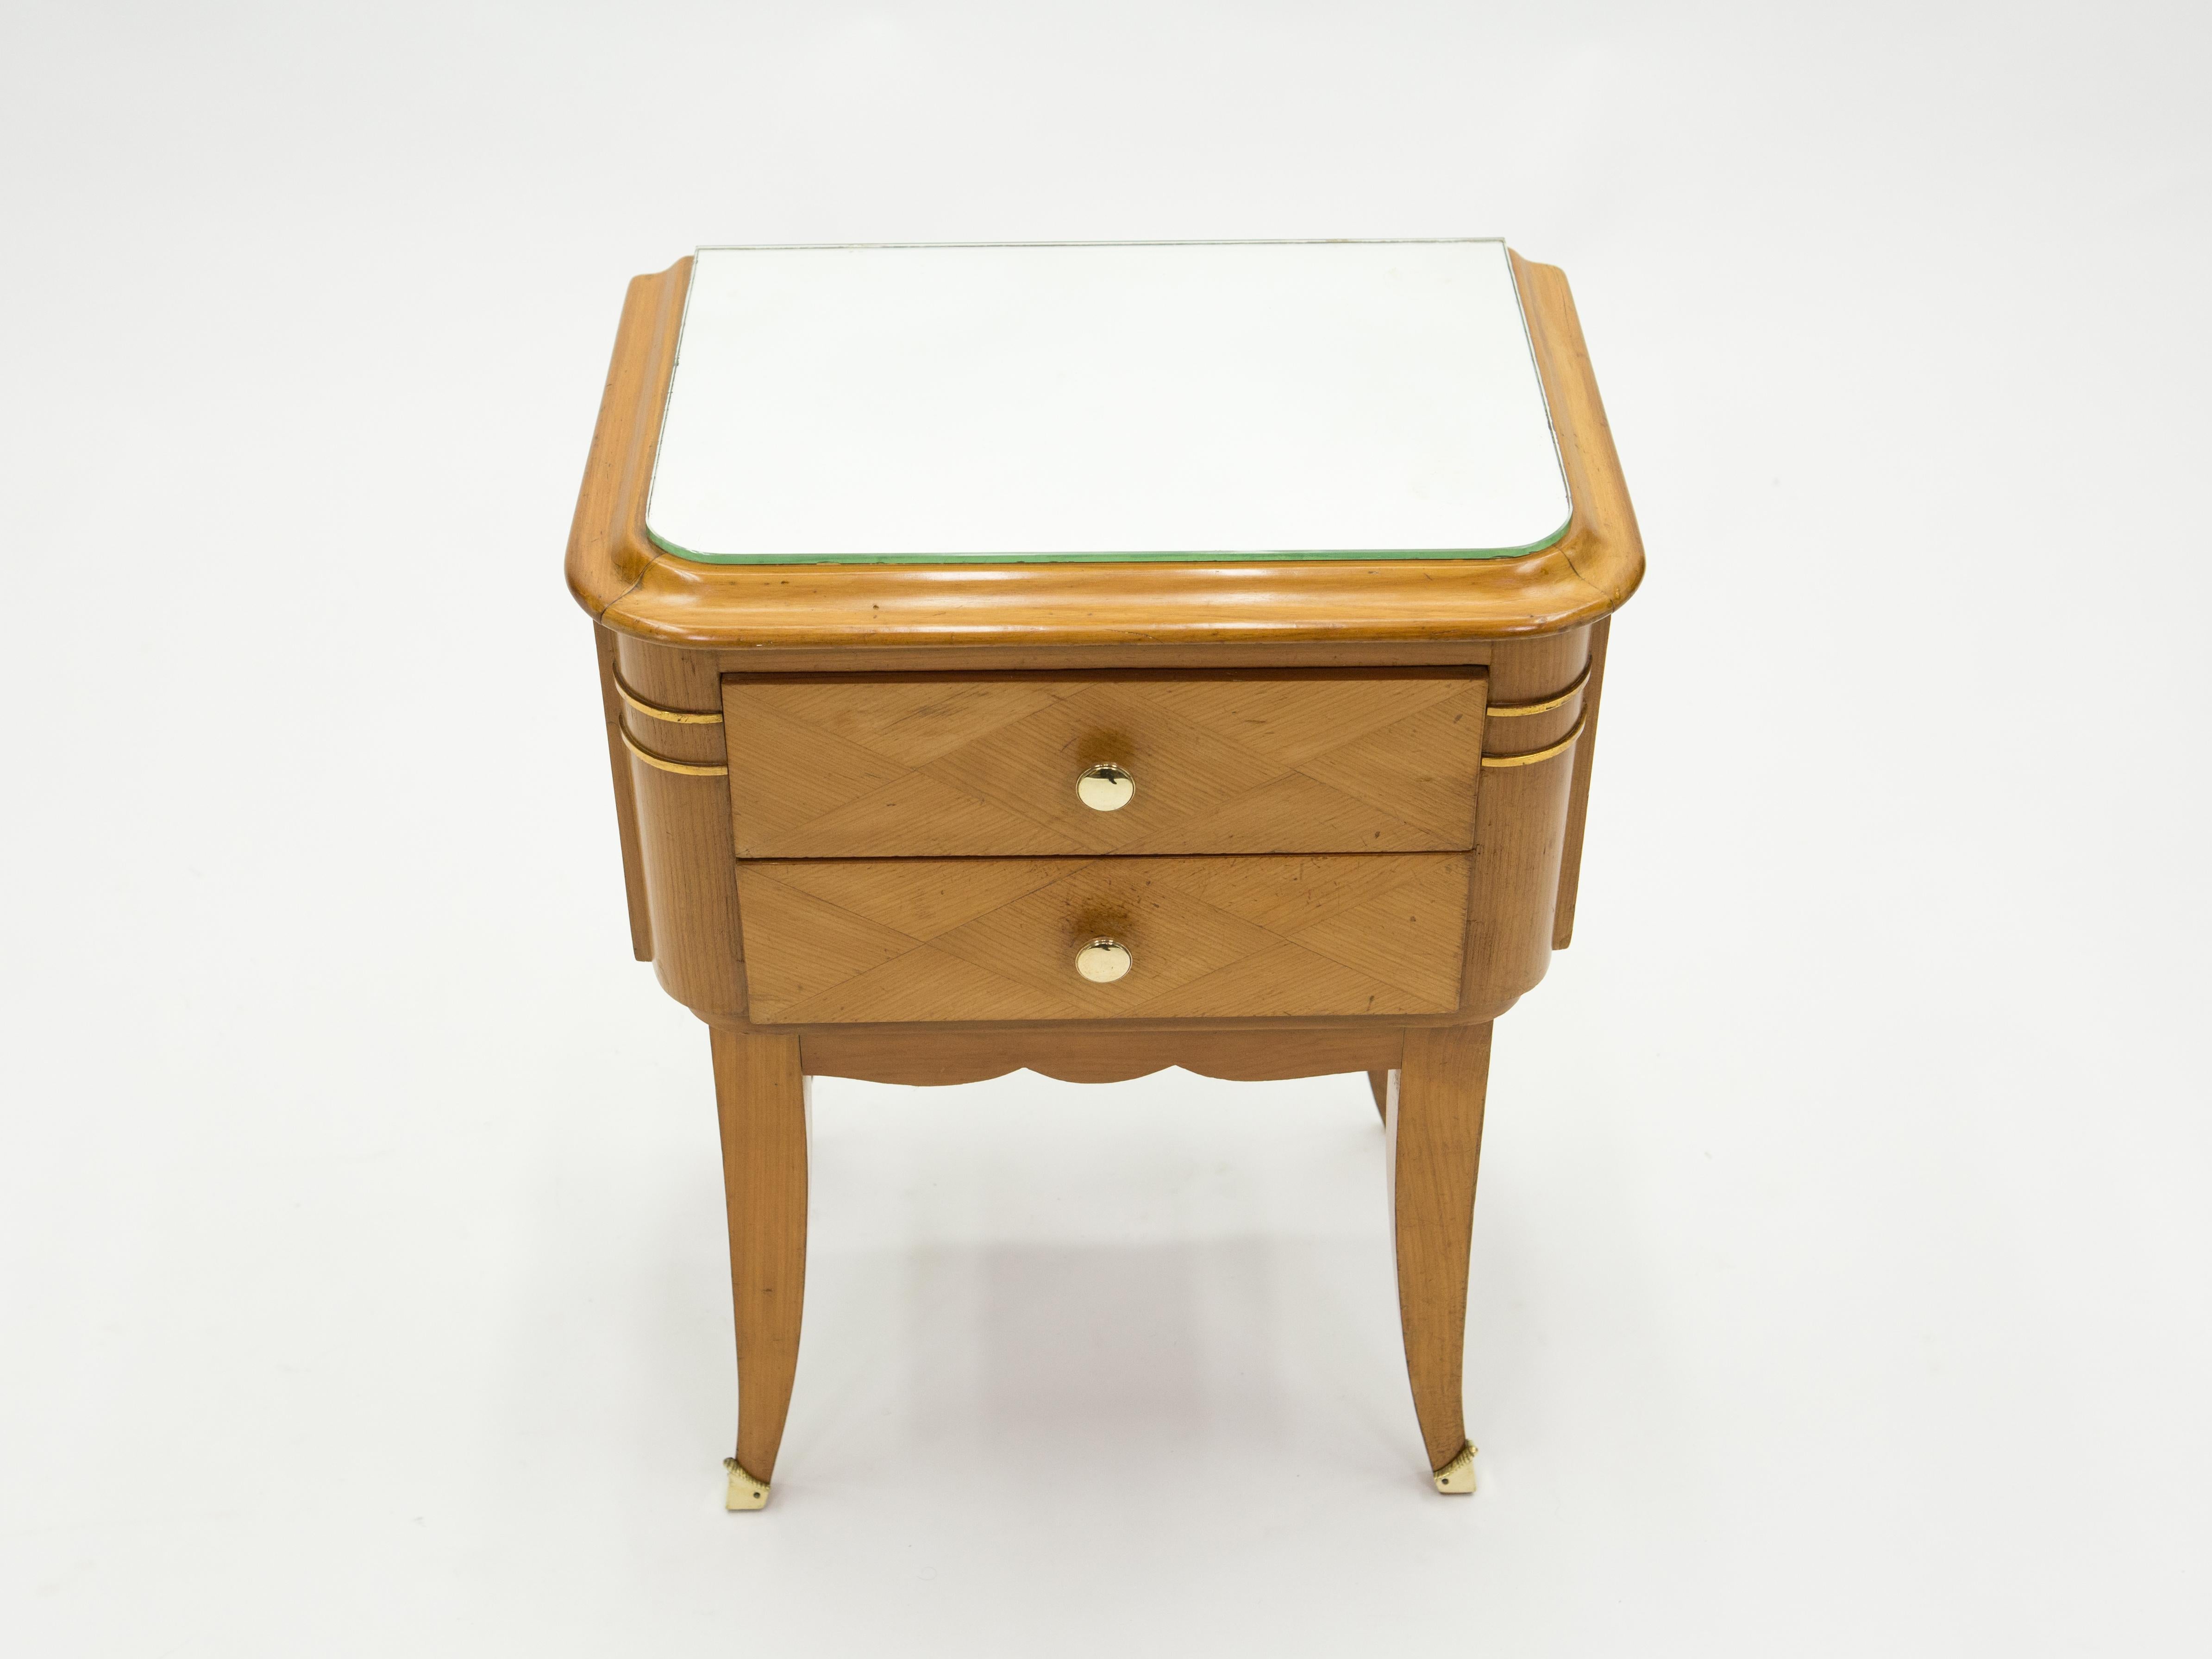 French Sycamore Brass Nightstands 2 Drawers by Jean Pascaud, 1940s For Sale 5